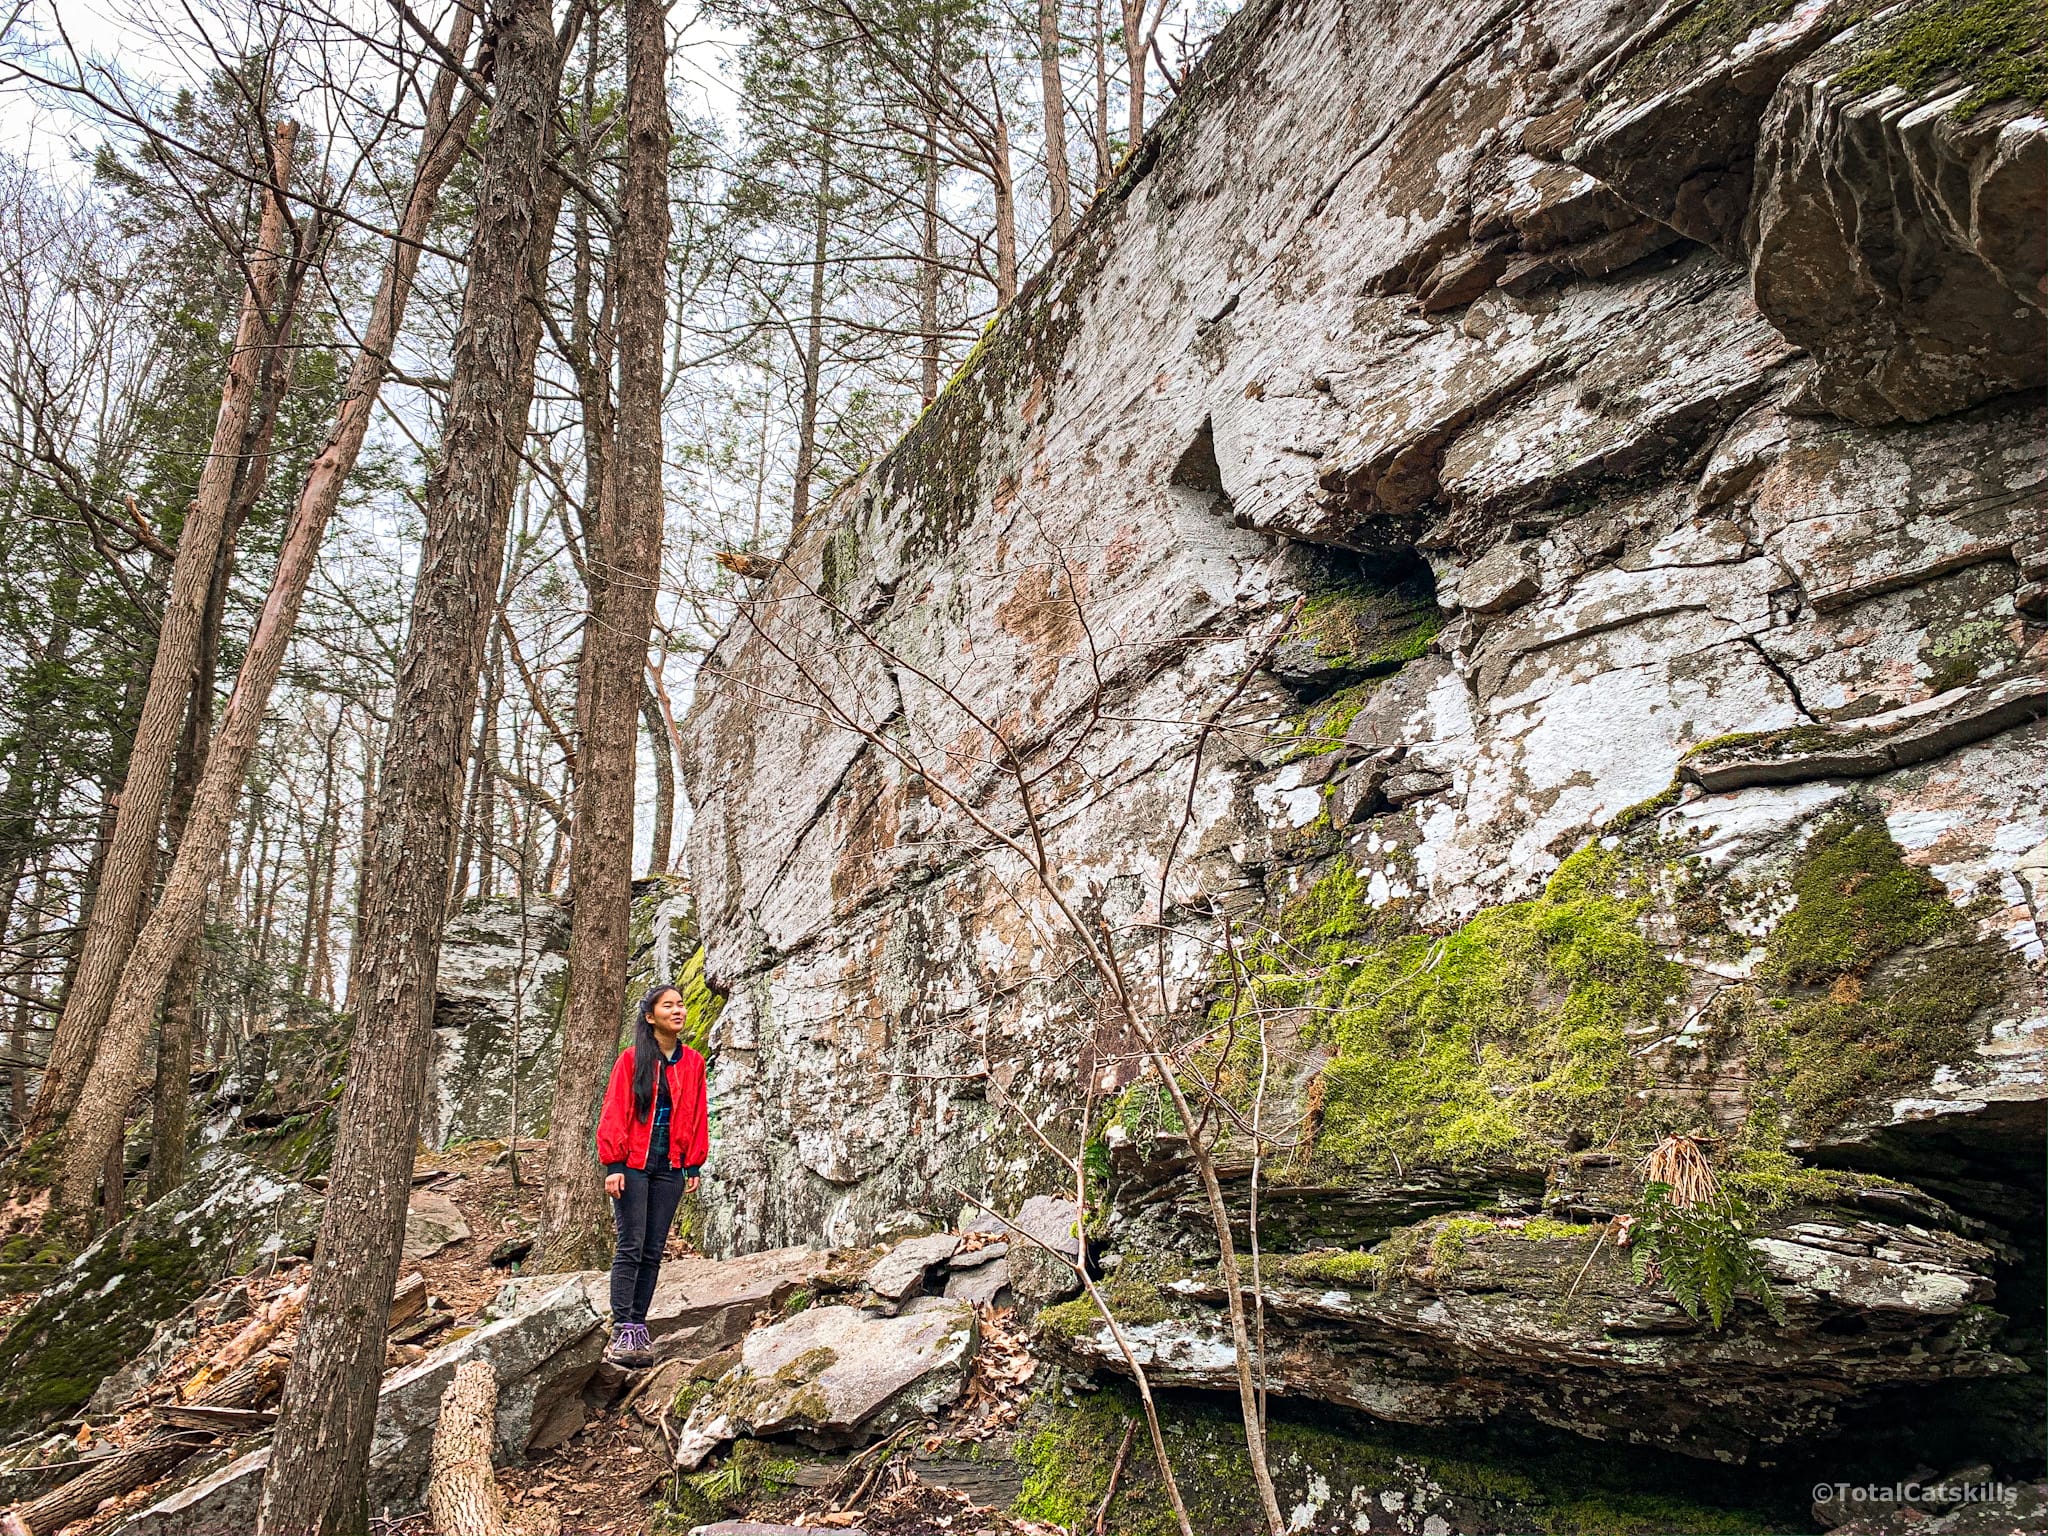 best hikes near woodstock ny: forest cliff face